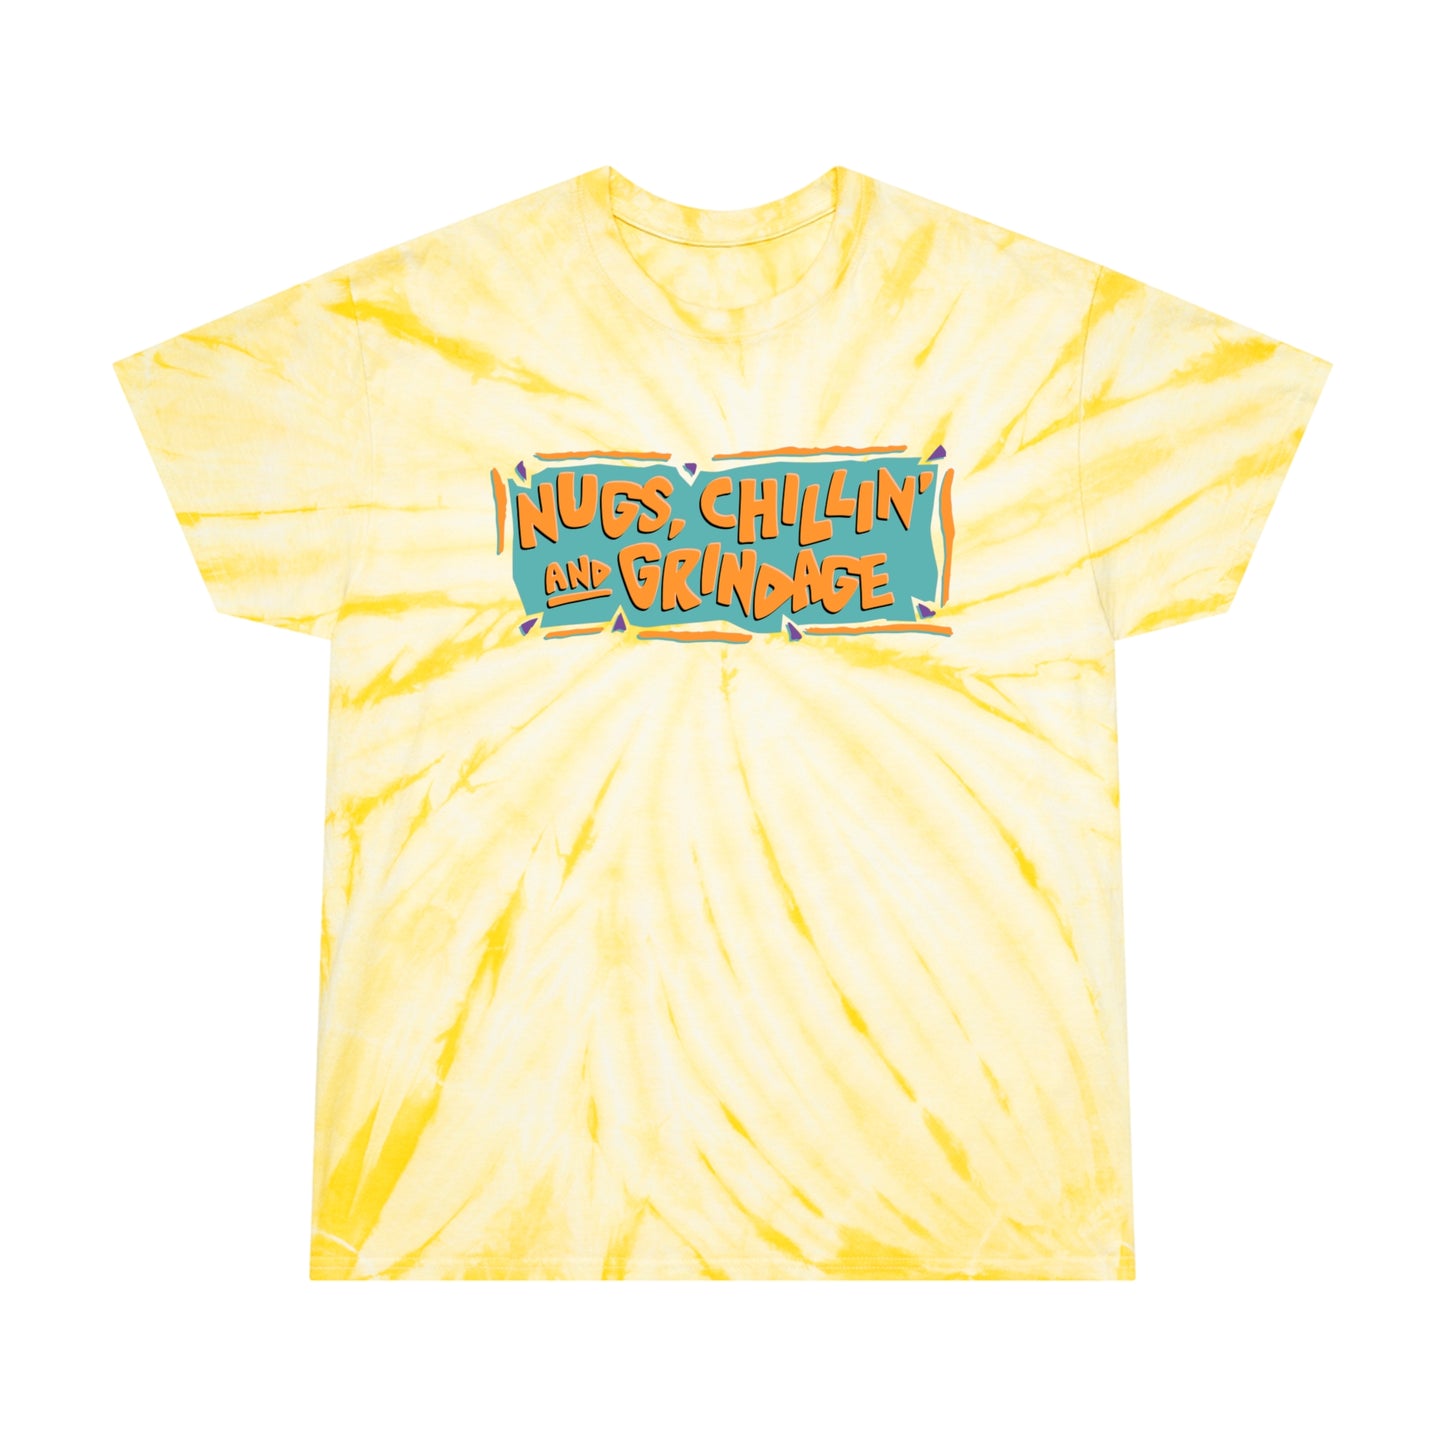 Nugs Chillin and Grindage tie-dye t-shirt